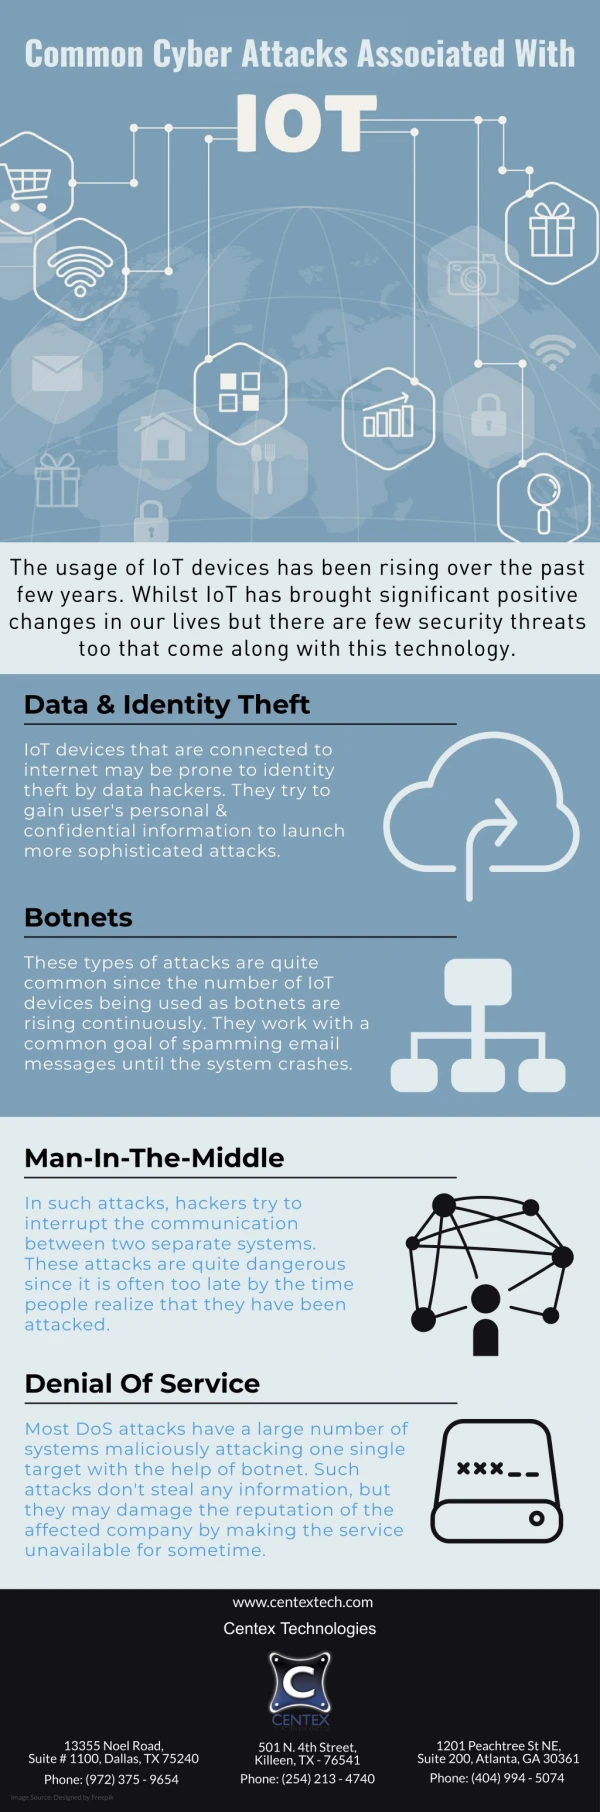 Common Cyber Attacks Associated With IOT